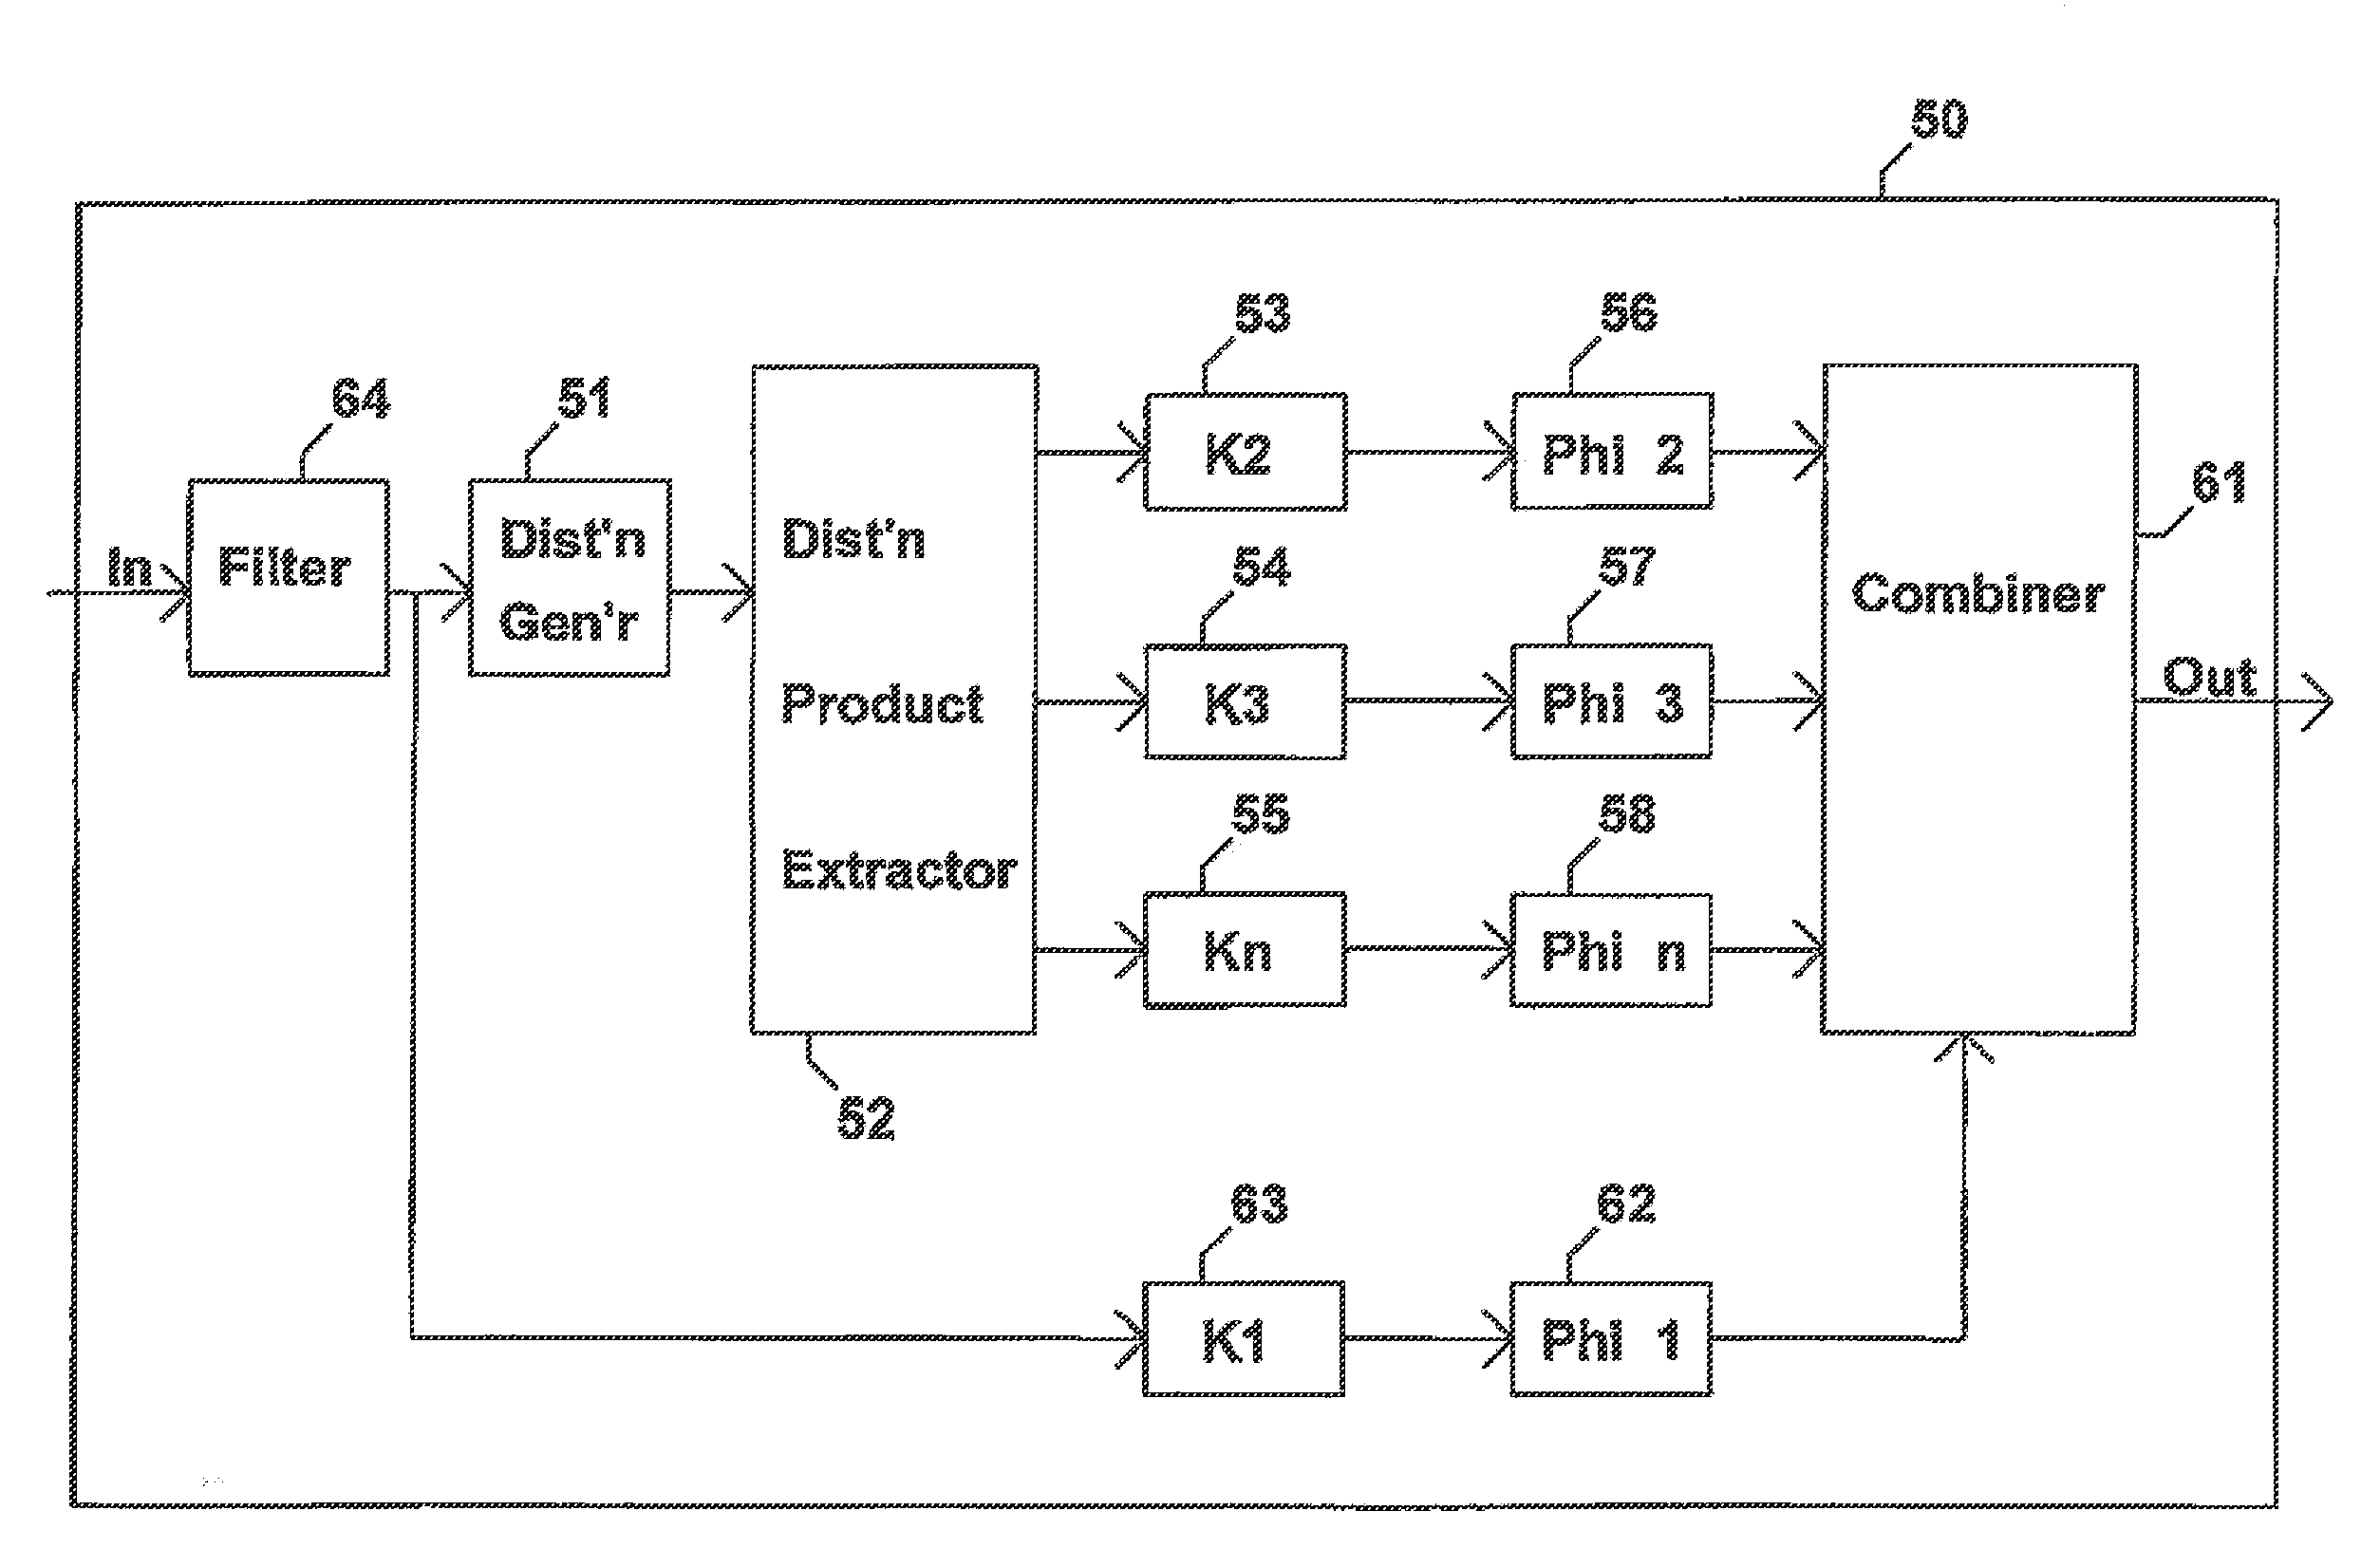 Method and apparatus to evaluate audio equipment via filter banks for dynamic distortions and or differential phase and frequency modulation effects